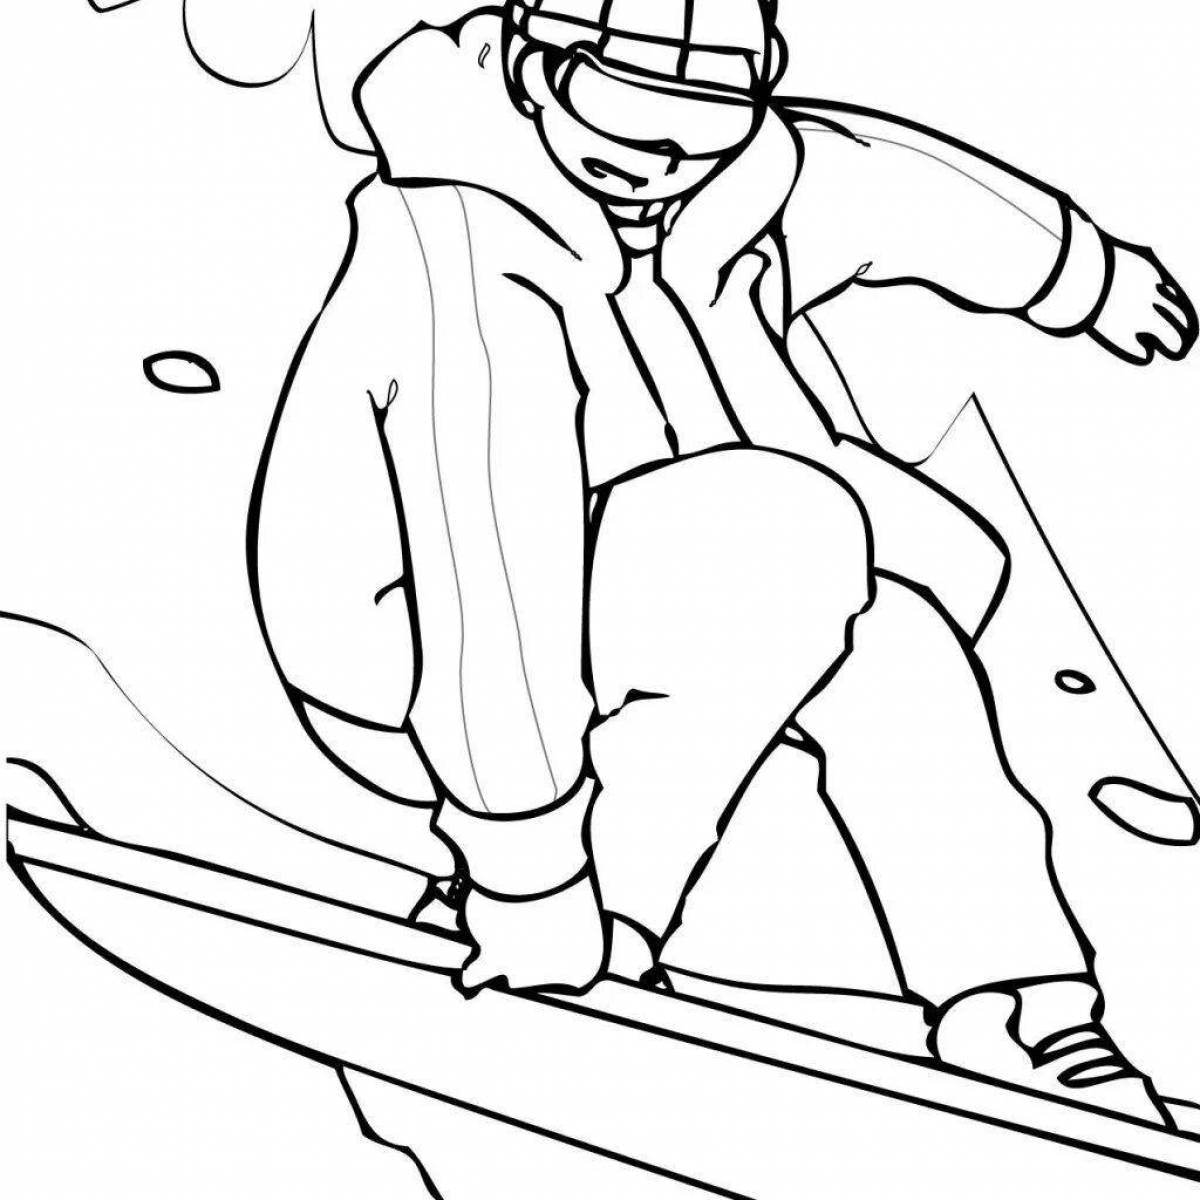 Playful snowboard coloring page for kids